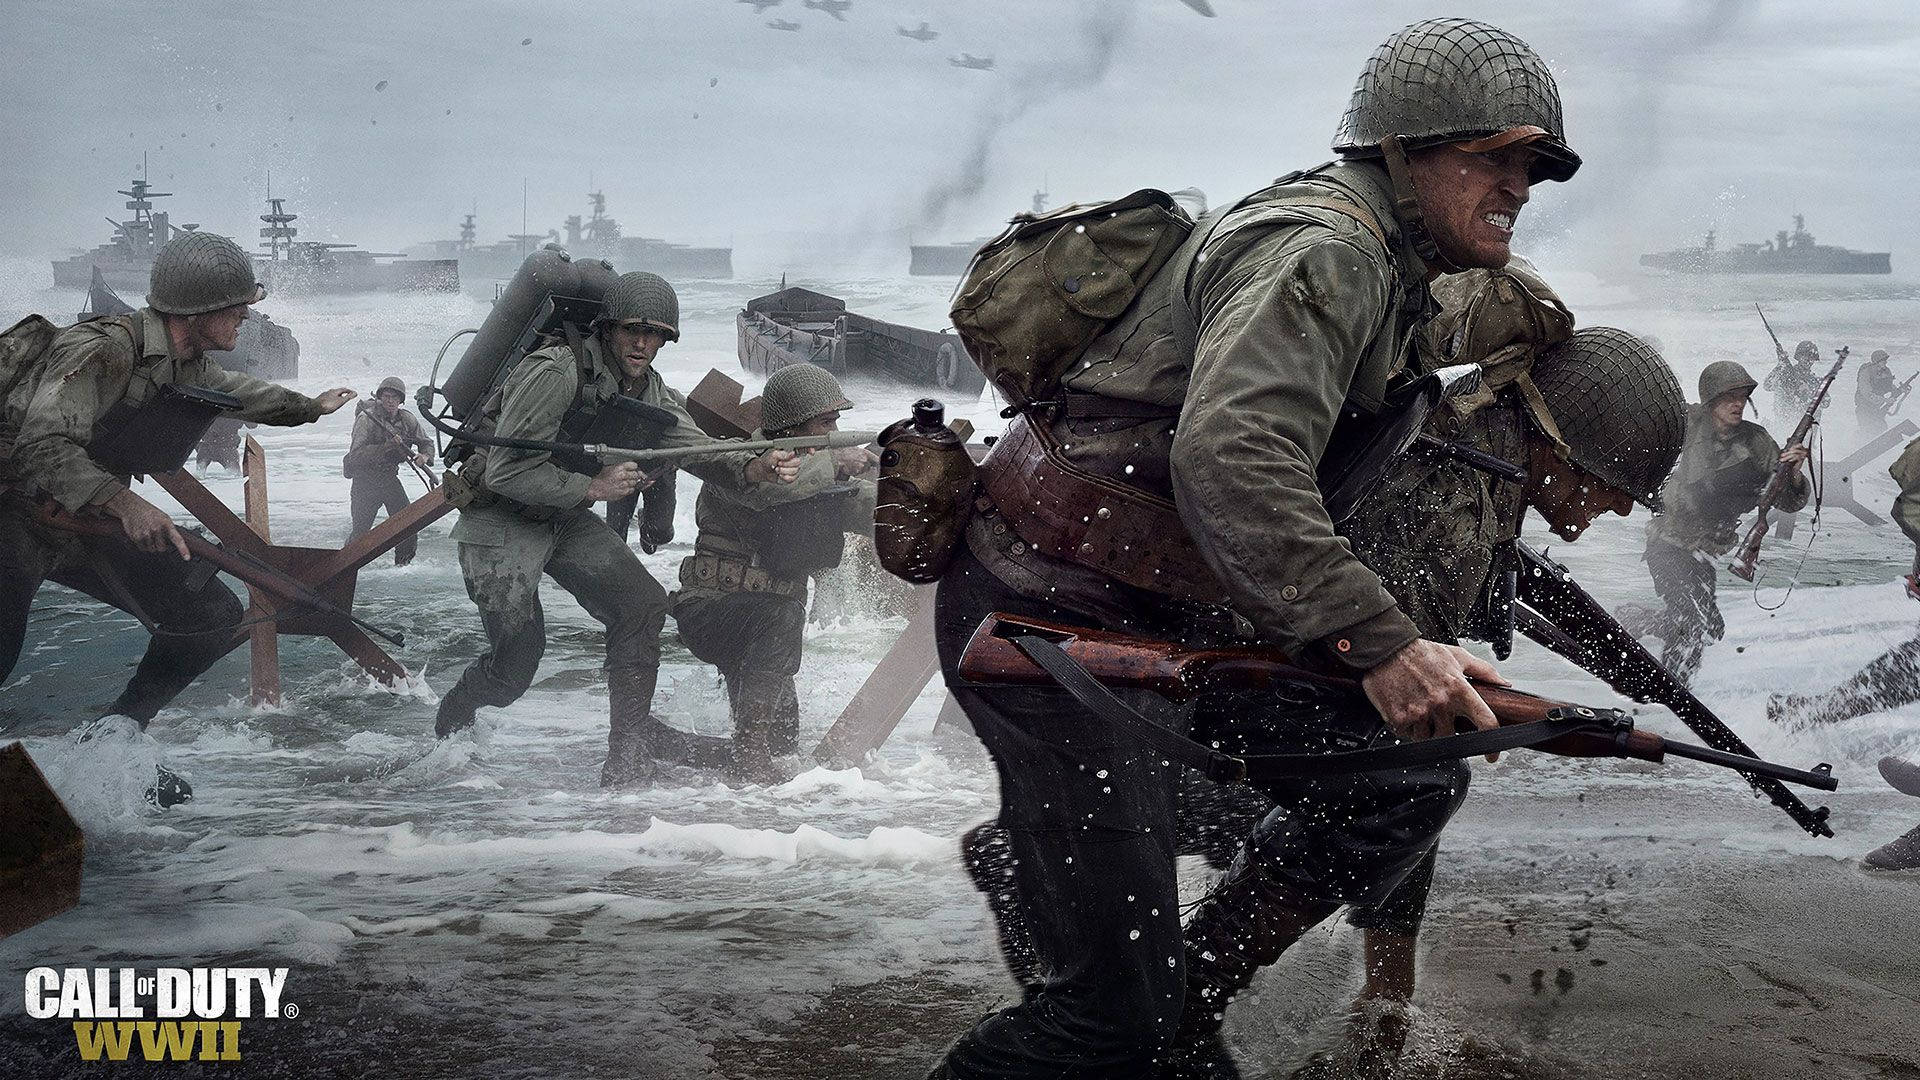 Call Of Duty Wwii Digital Poster Background